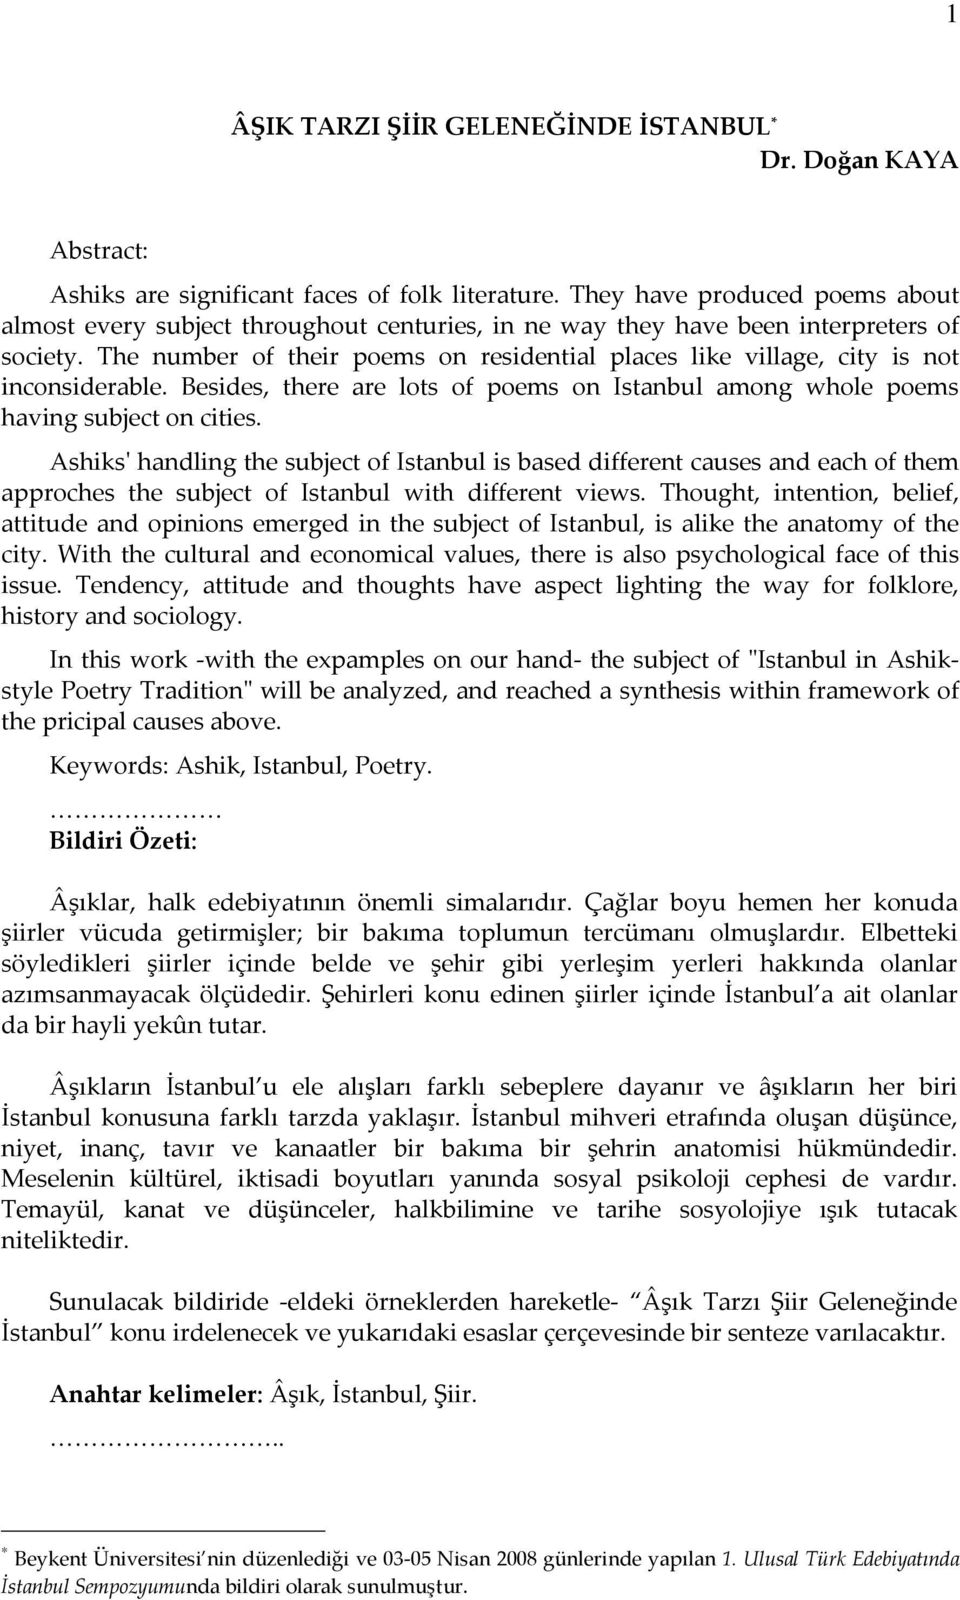 The number of their poems on residential places like village, city is not inconsiderable. Besides, there are lots of poems on Istanbul among whole poems having subject on cities.